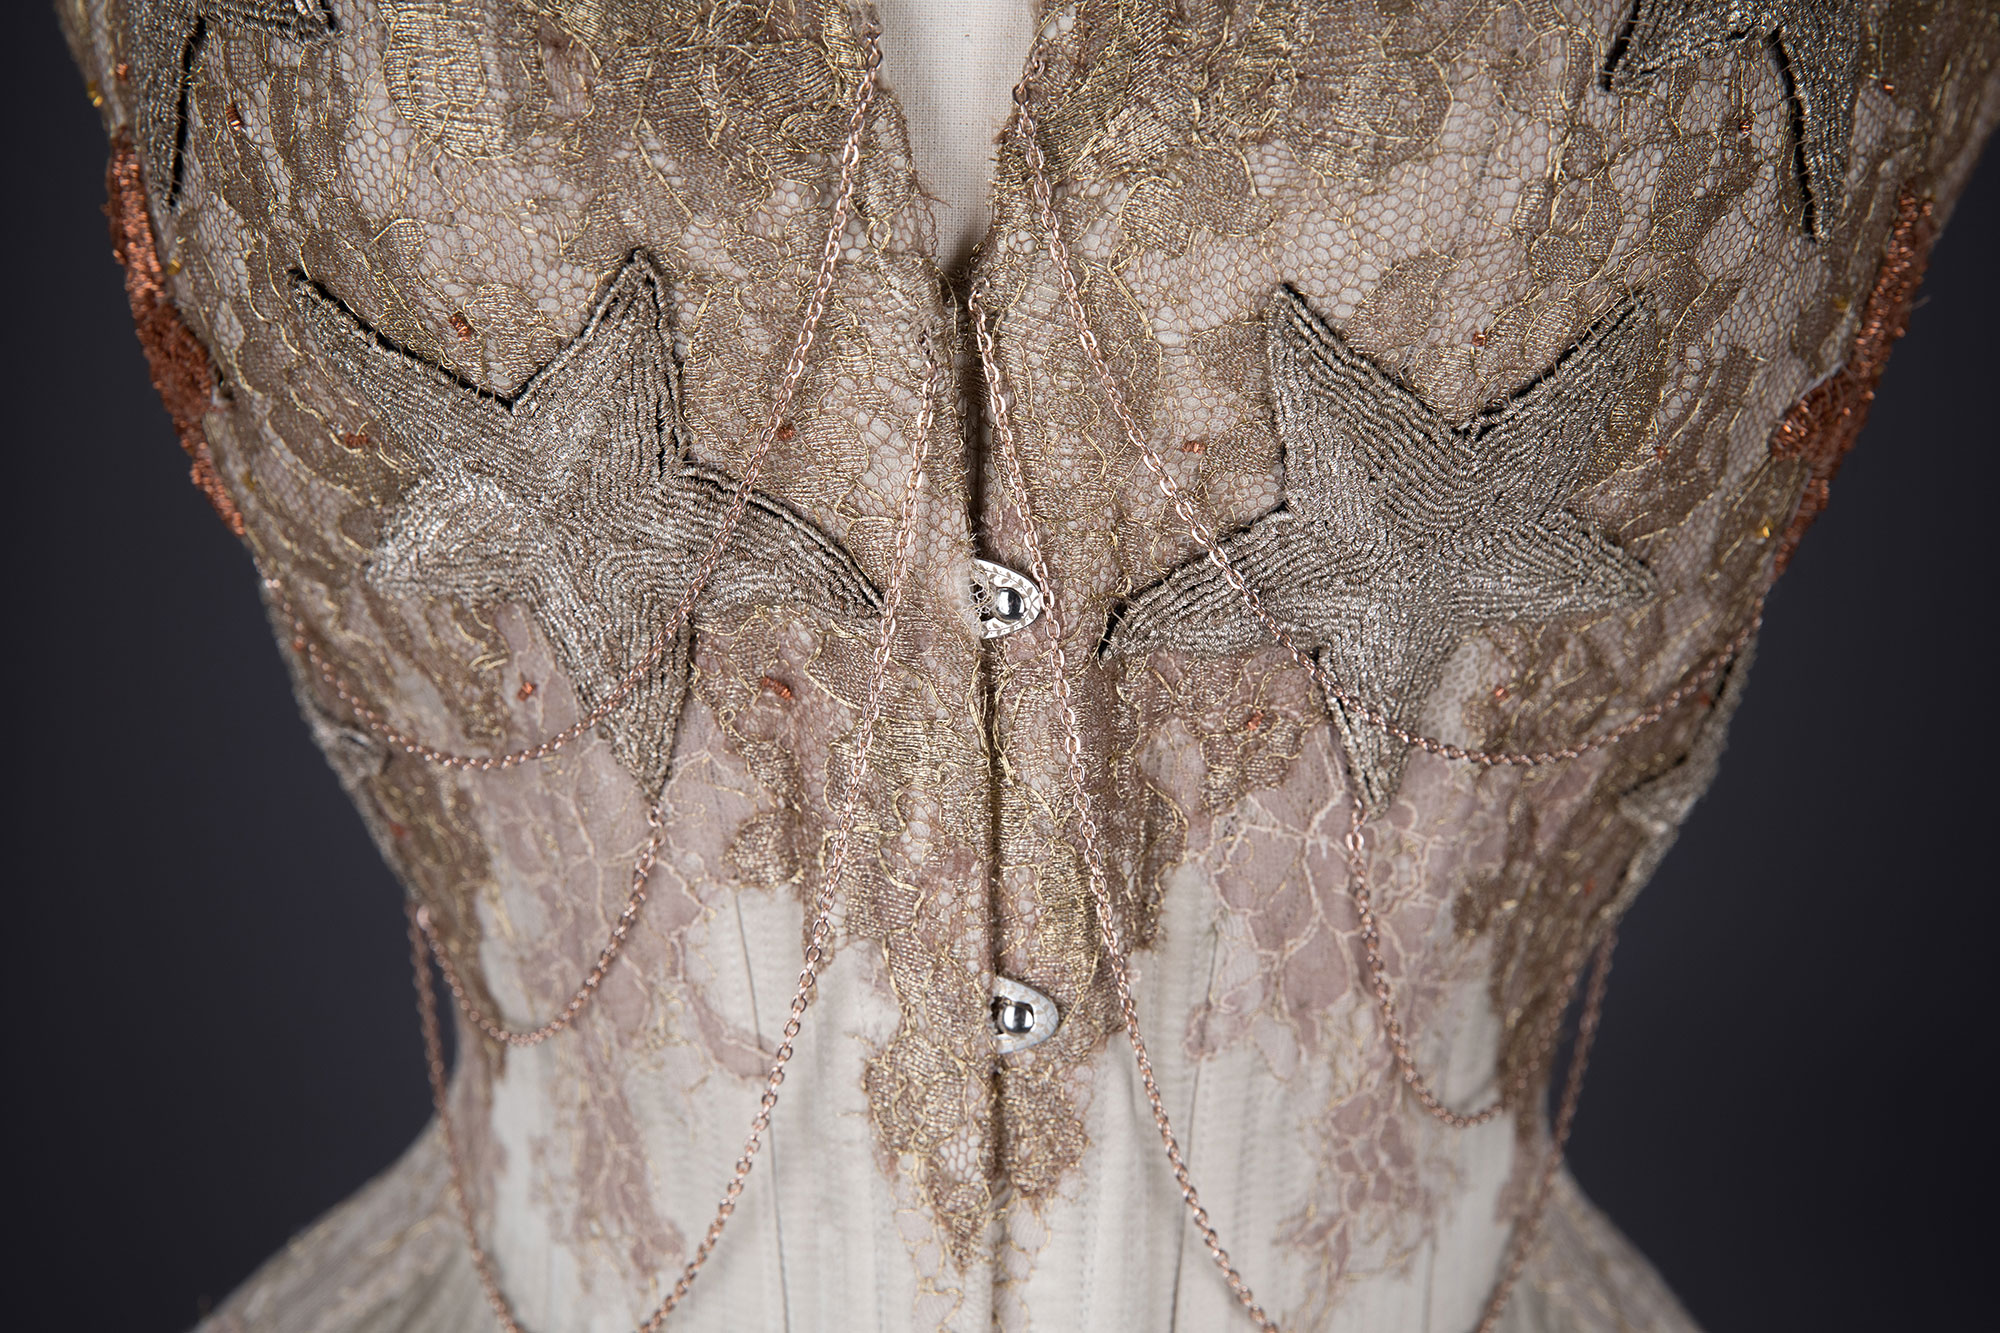 Ornate Sparklewren corset from The Underpinnings Museum collection photographed by Hertfordshire brand photographer Tigz Rice